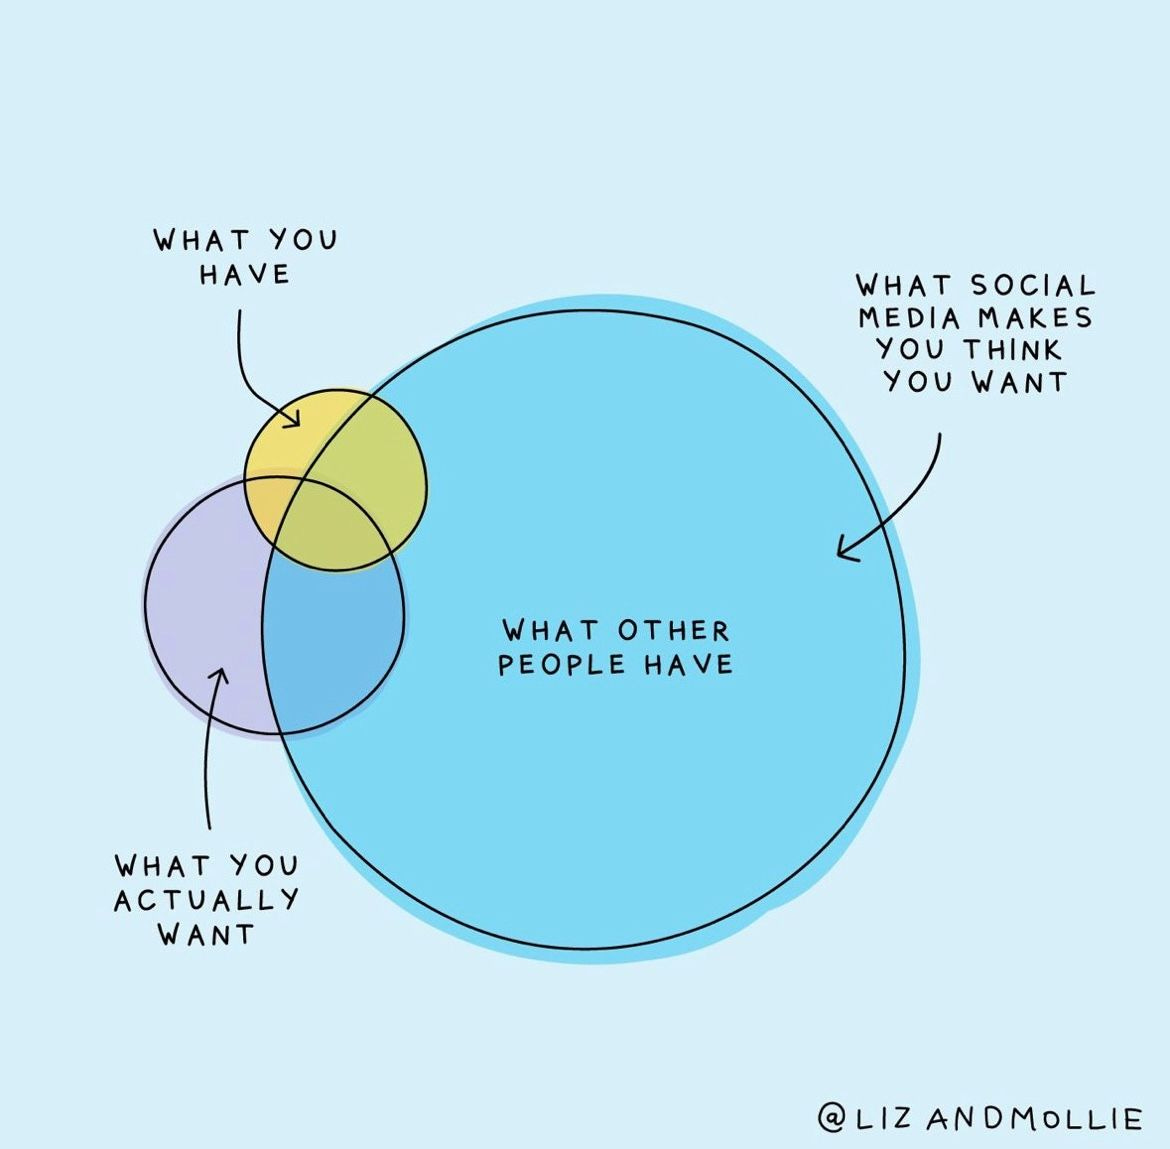 An illustration comparing what you have and want to what other people have